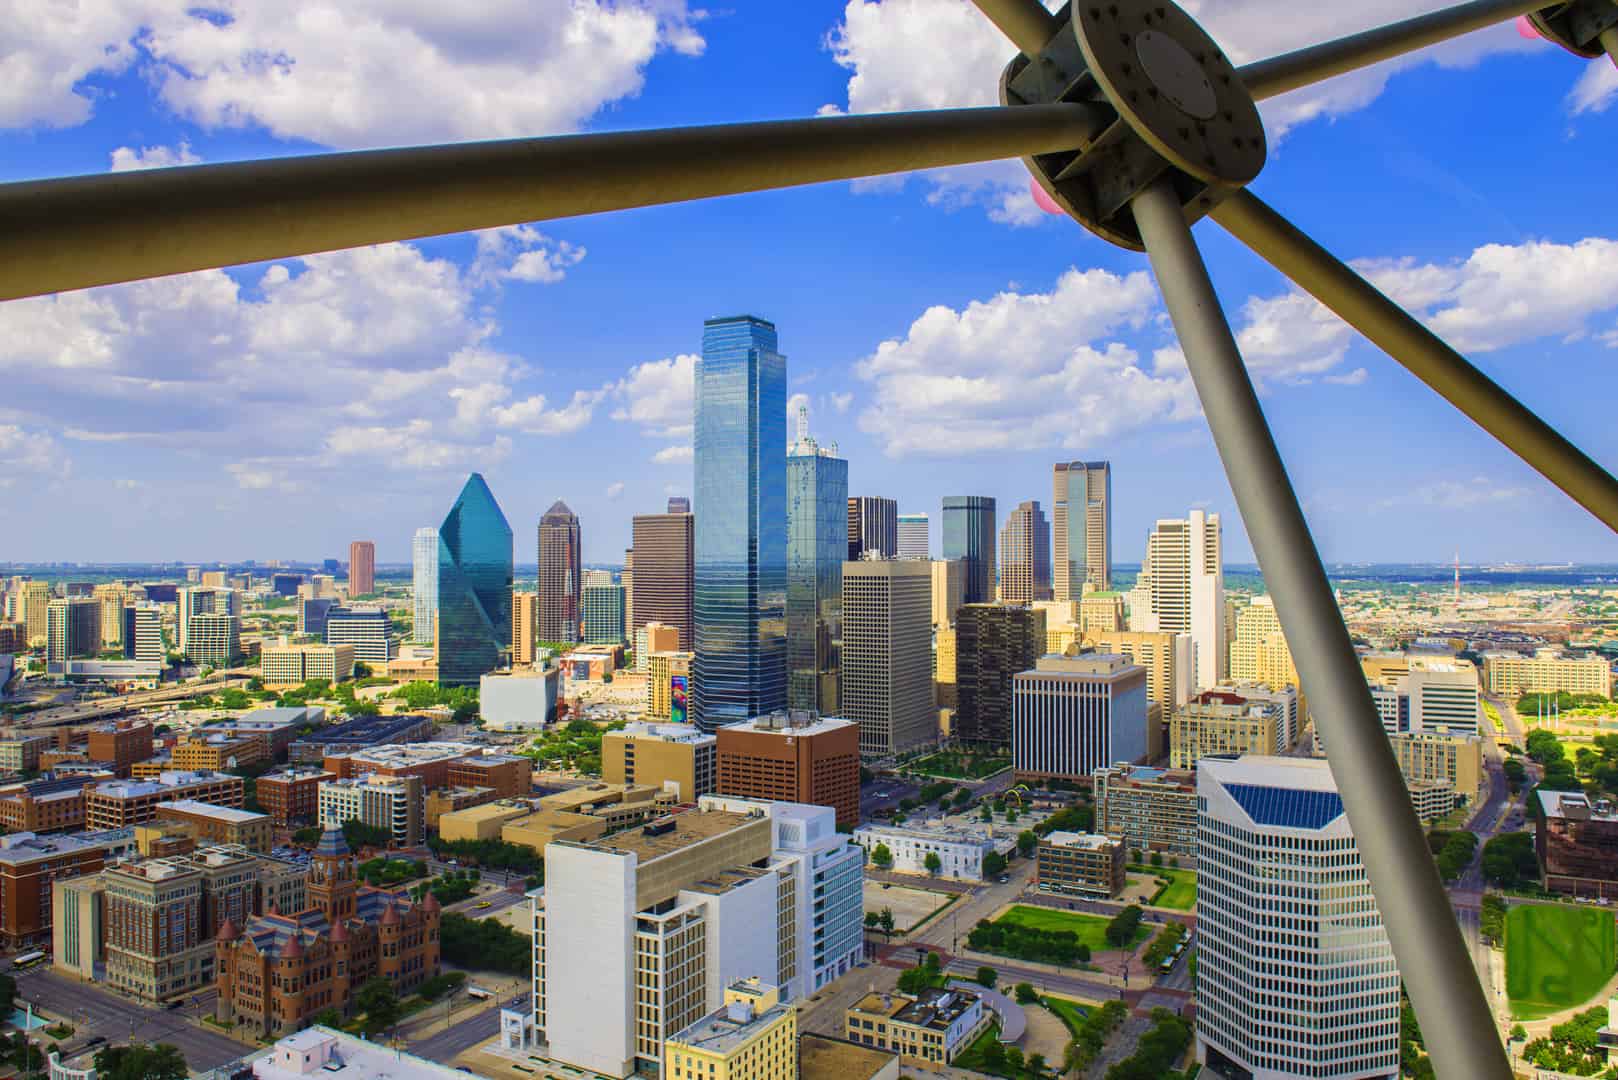 <p>Once lauded for its low cost of living, that’s changed with a year-on-year increase in residents. Dallas is now known for its “Brutal heat, brutal traffic, and violent weather.” Add in fewer gun control laws, the party scene, and the lack of nearby nature; people want to build their lives elsewhere.</p>